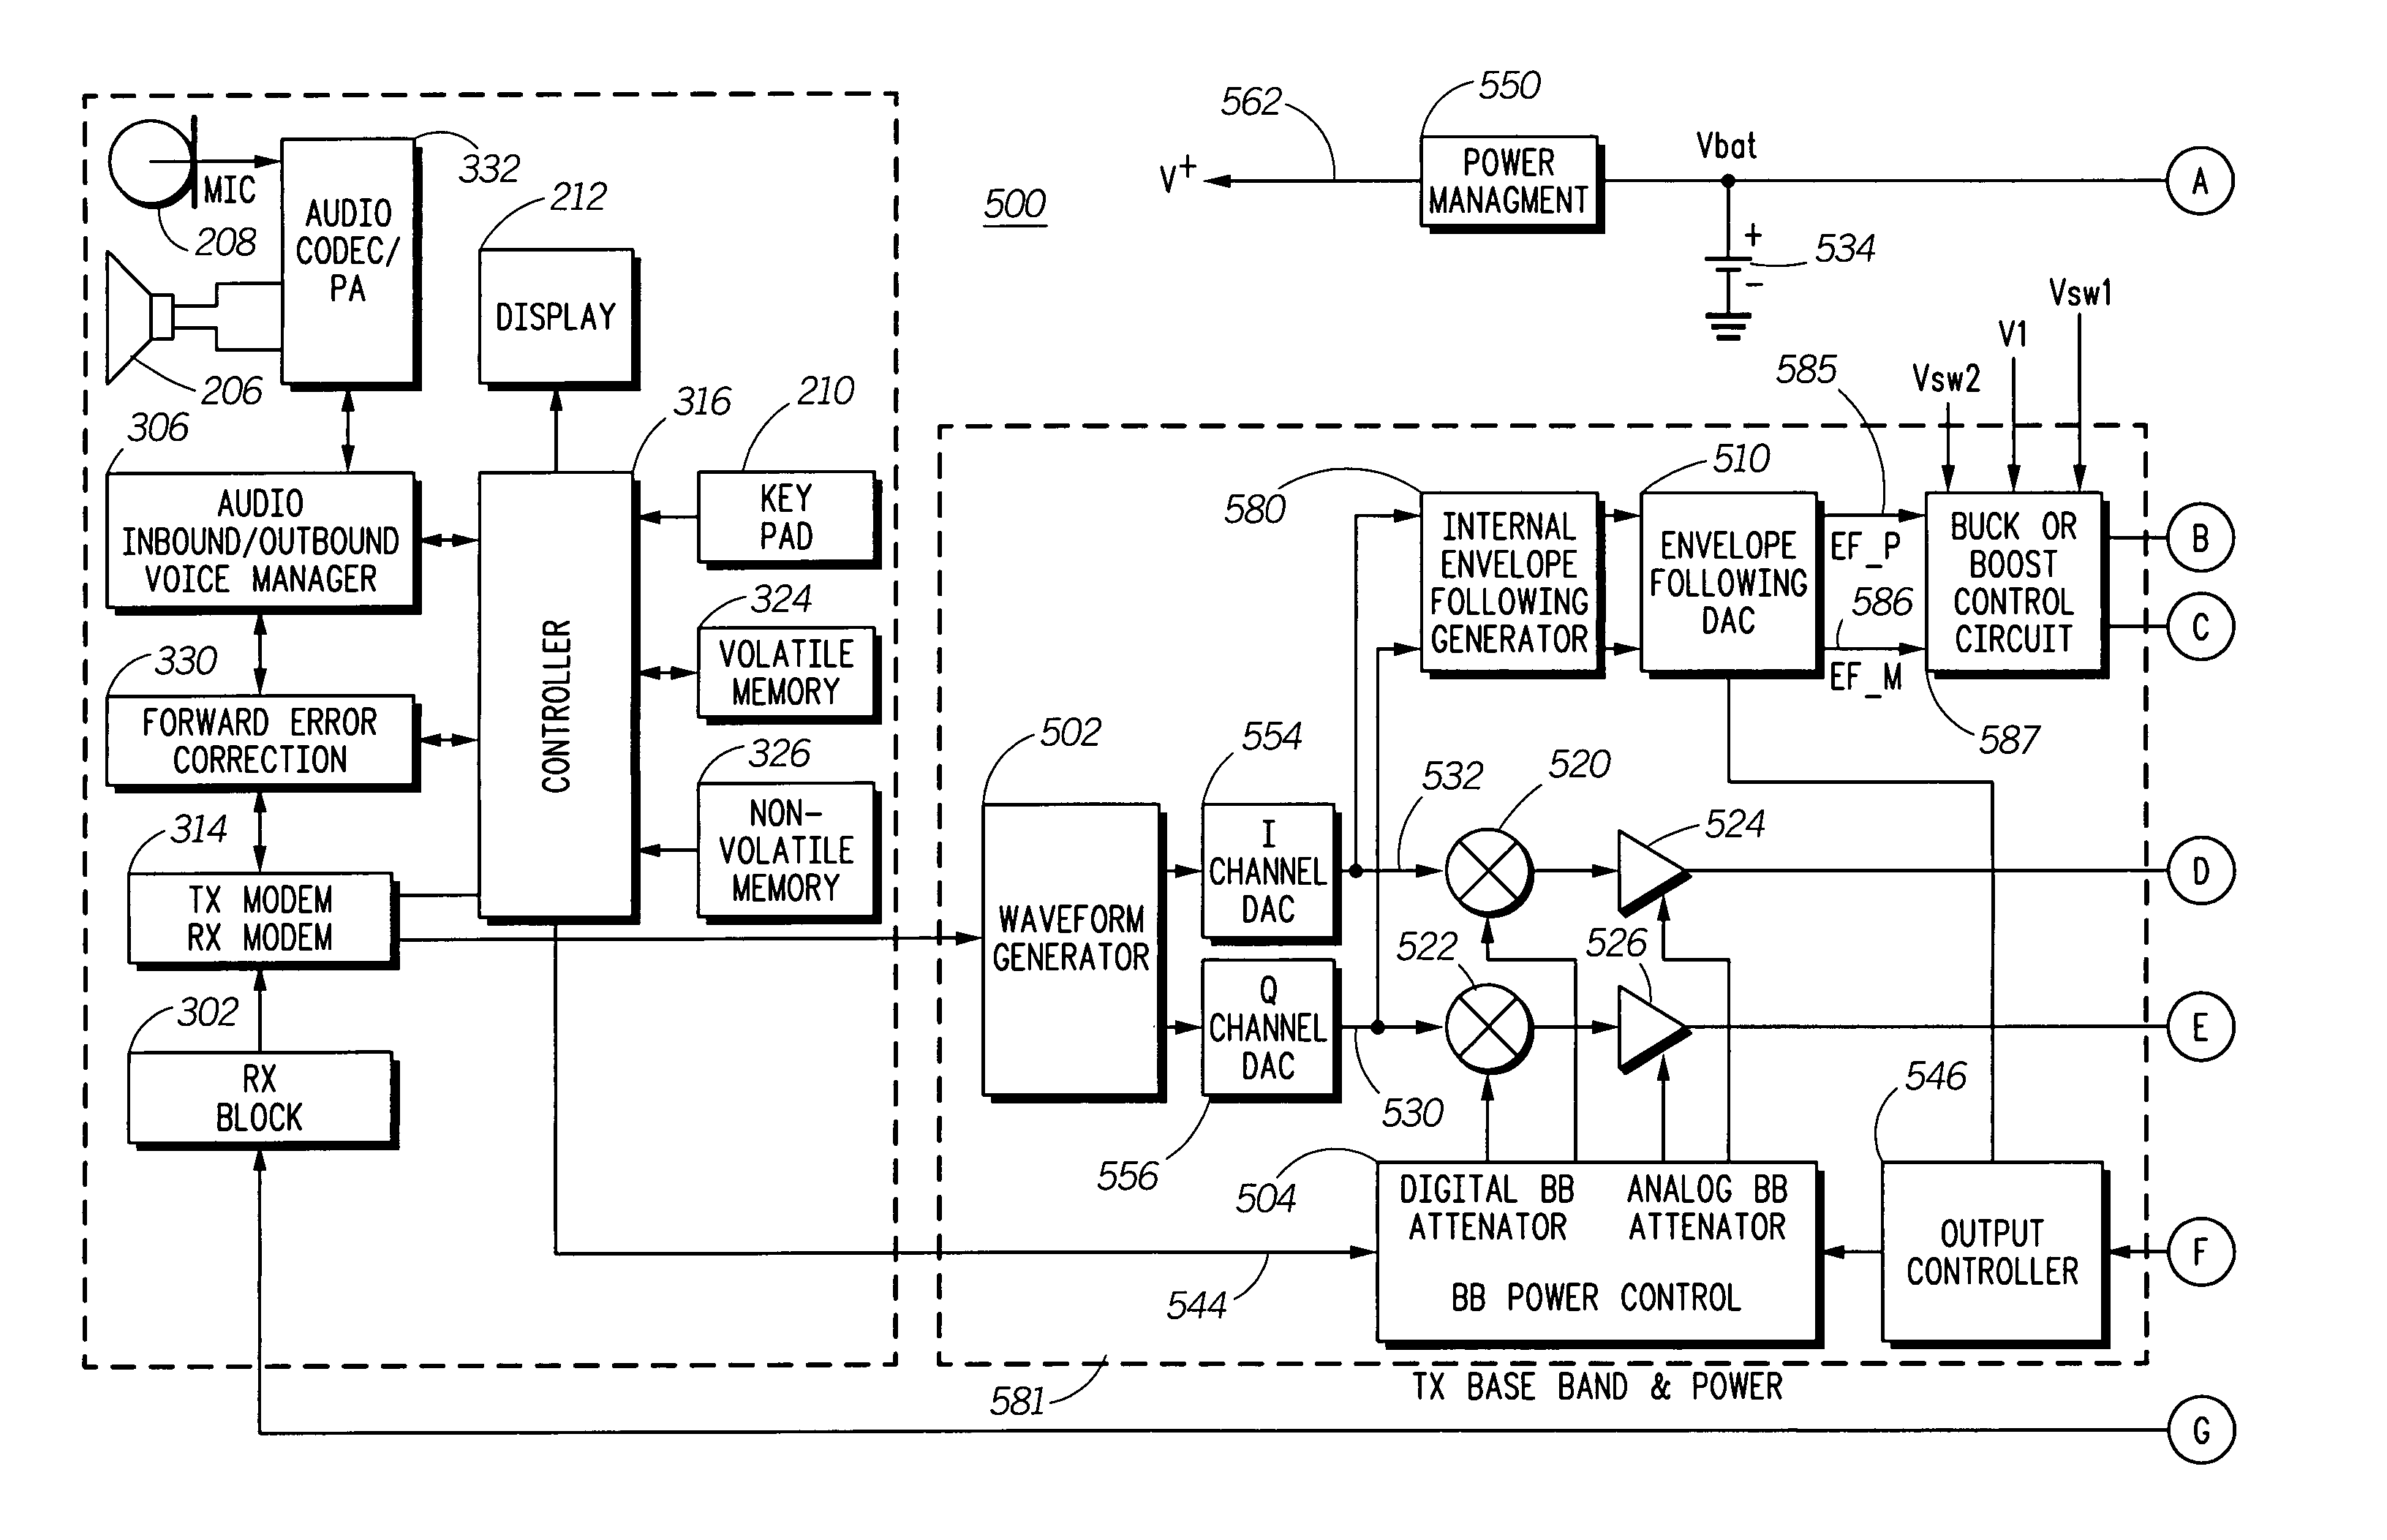 Amplifier with varying supply voltage and input attenuation based upon supply voltage